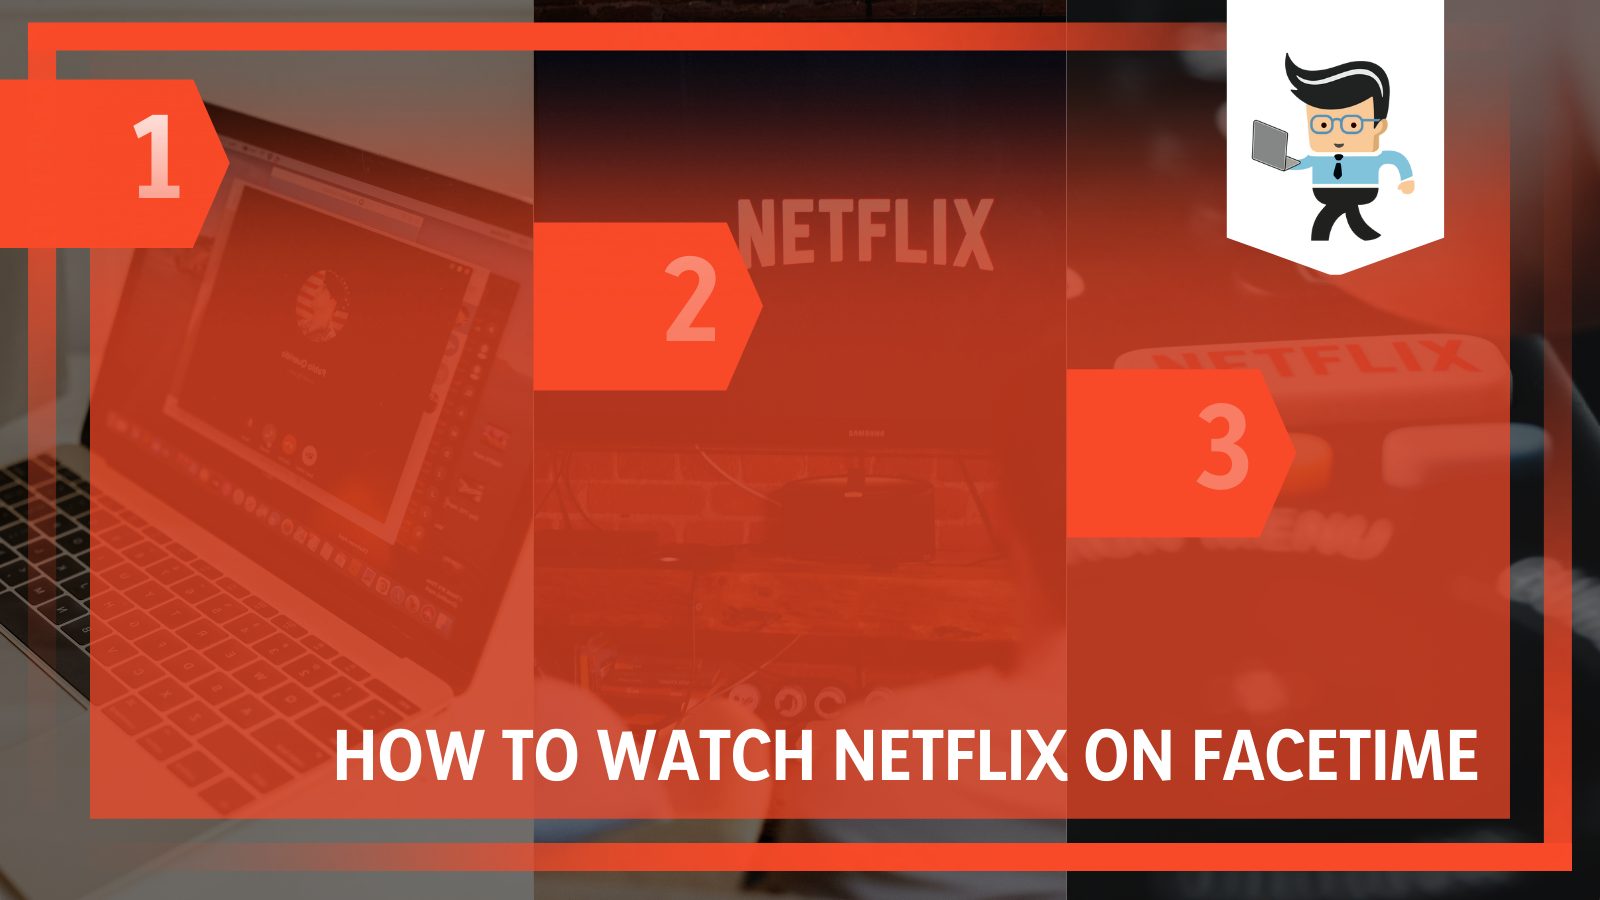 How to Watch Netflix on Facetime